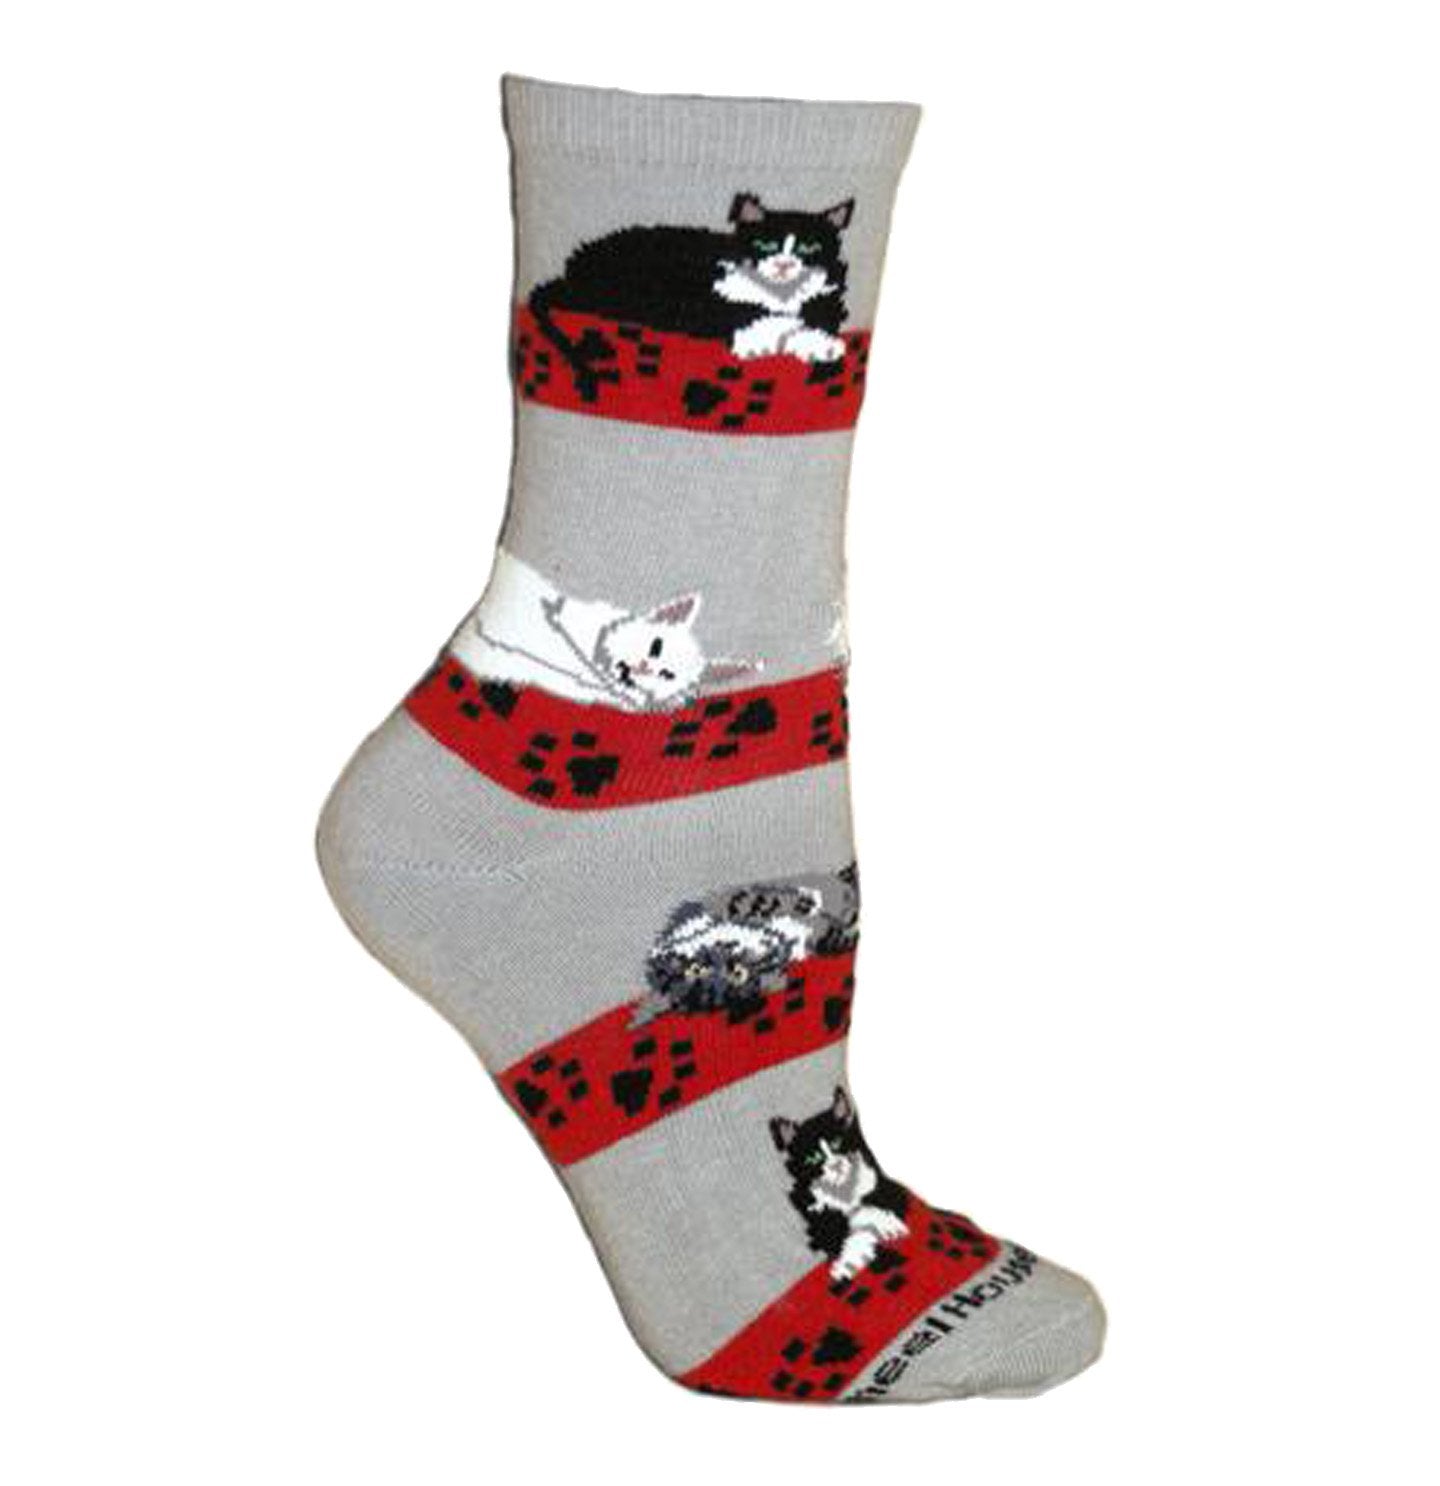 Animal Pride - Cats Cats Cats on Grey - Adult Cotton Crew Socks